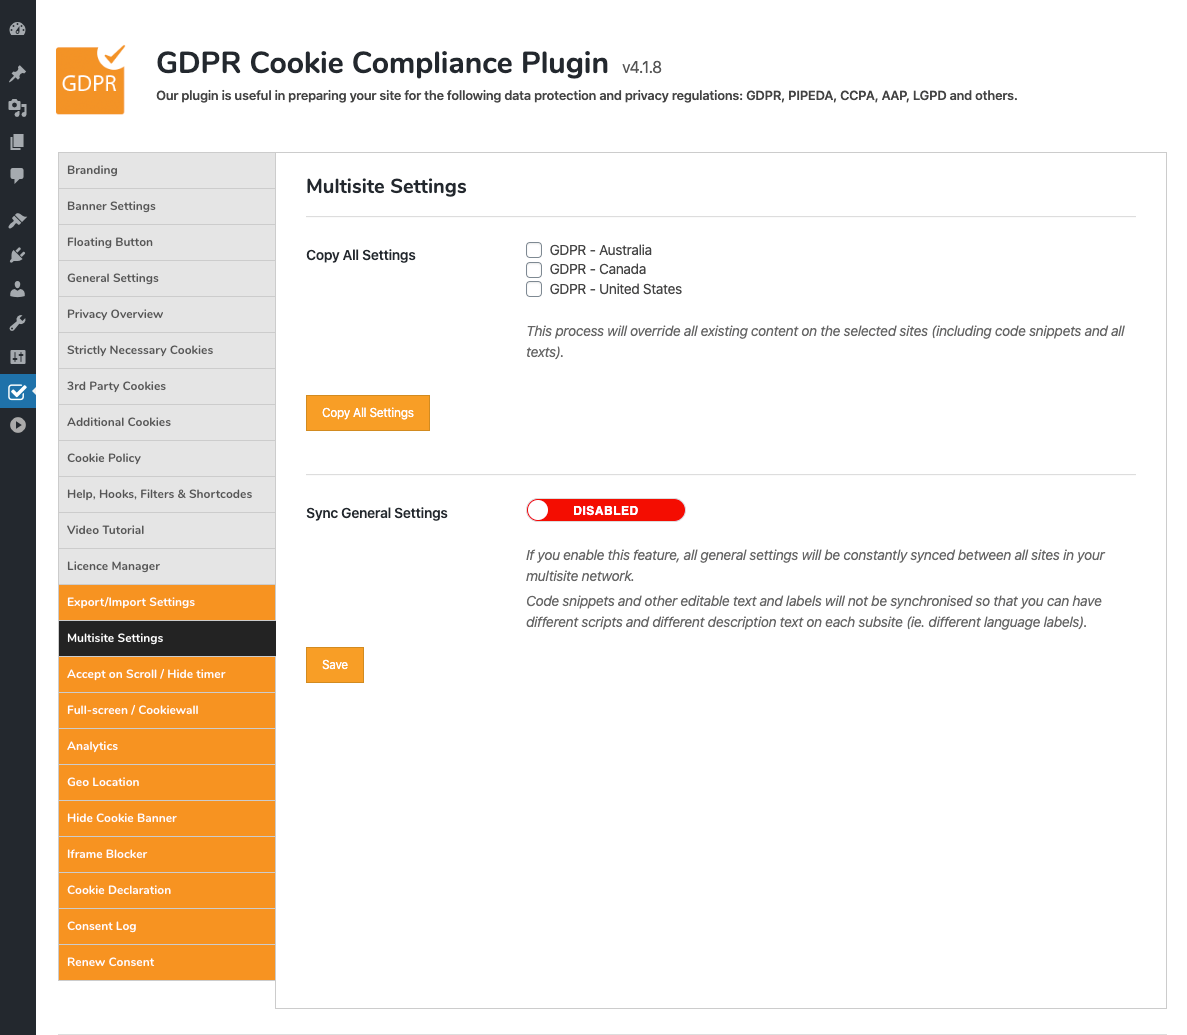 GDPR Cookie Compliance - Admin - Additional Cookies (GTM Example Body)